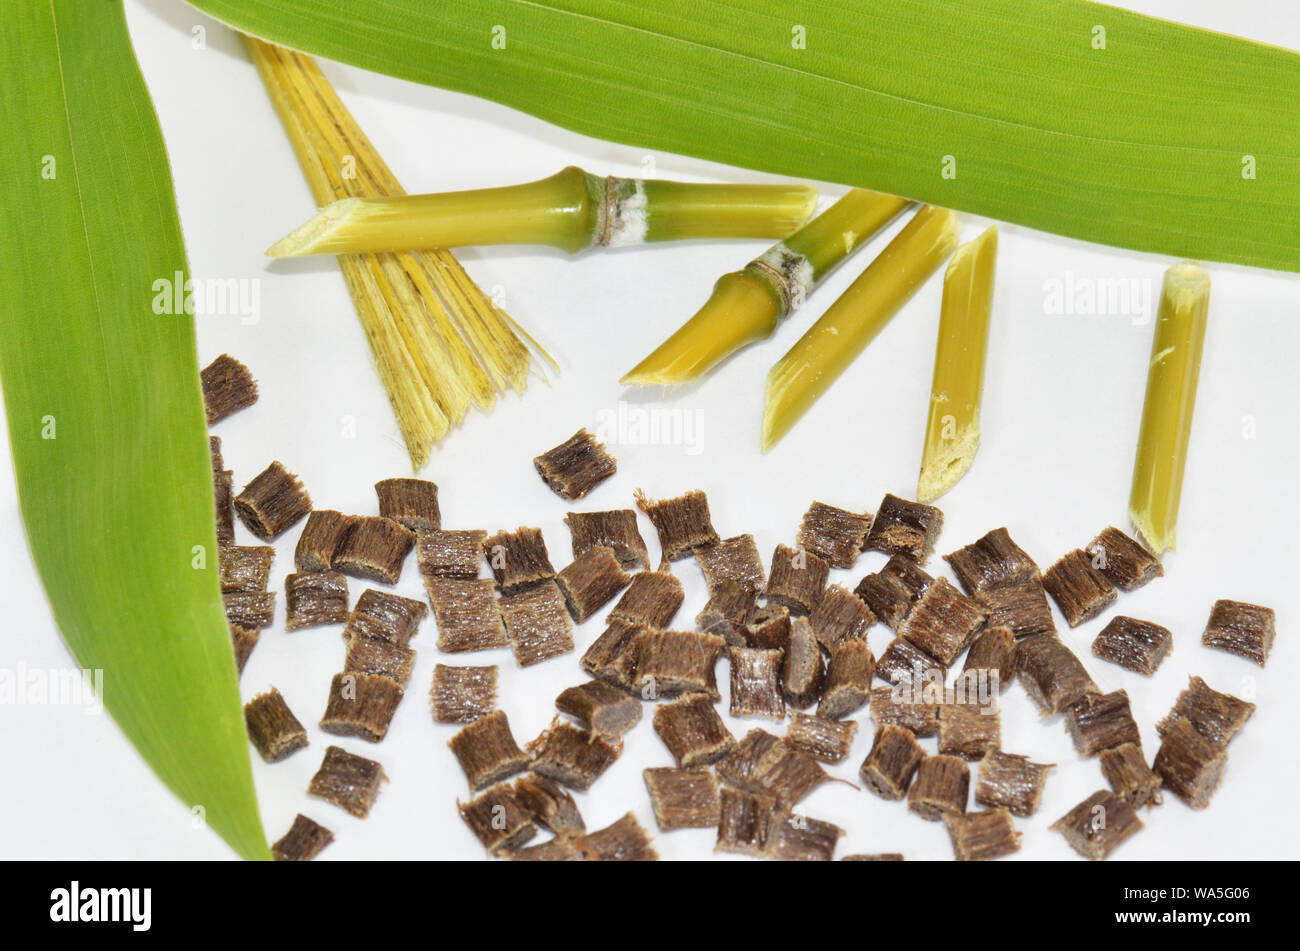 Biopolymer with and based on bamboo Stock Photo